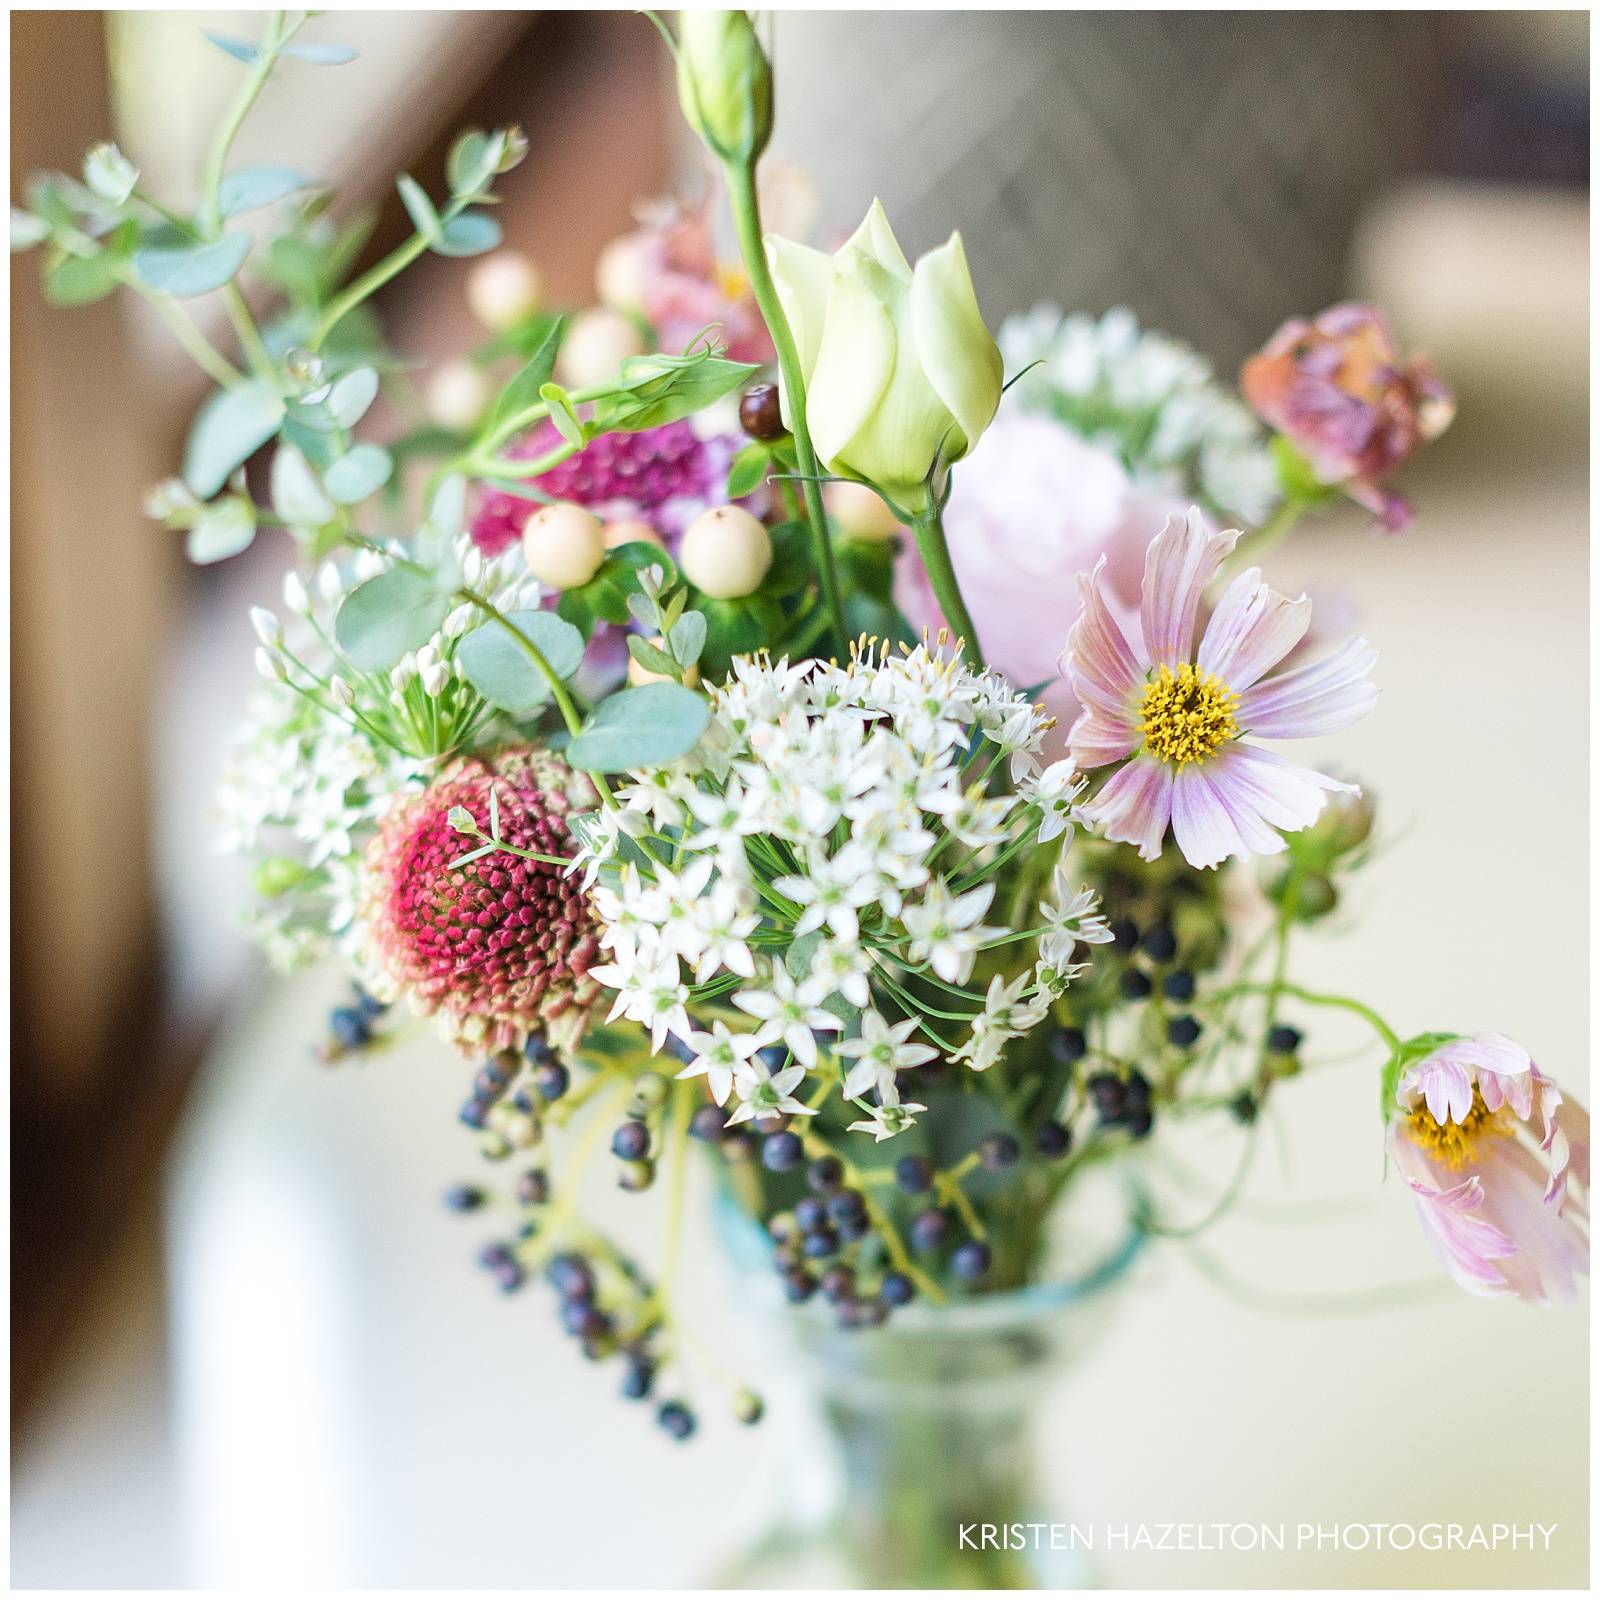 Late summer bouquet with pink cosmos and white allium flowers